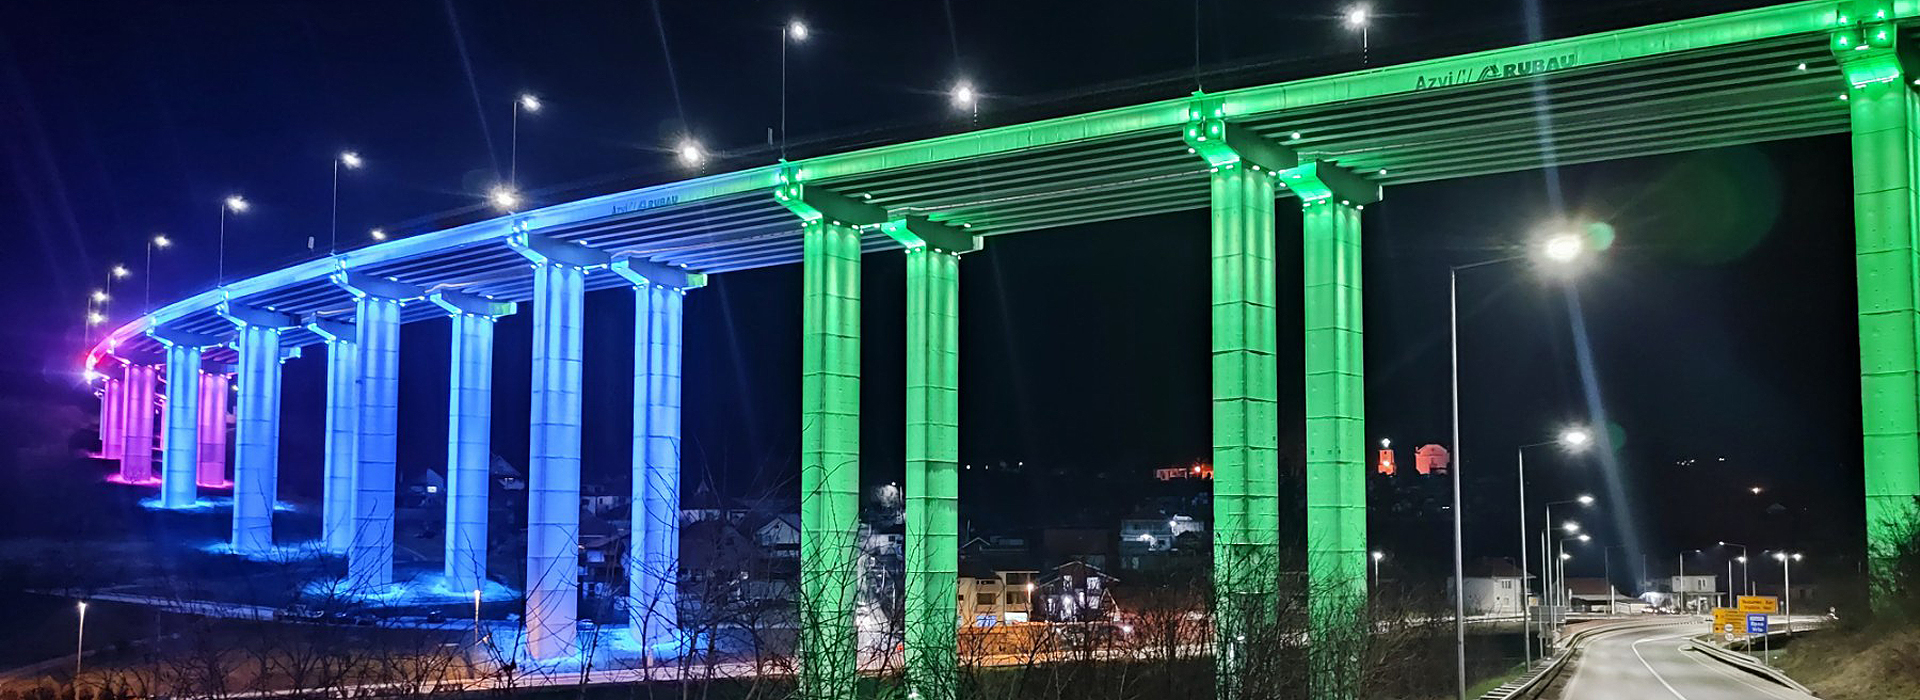 PE "ROADS OF SERBIA" ILLUMINATED THE BRIGDES AND SUPPORTED THE ACTION OF THE NATIONAL ORGANIZATION FOR RARE DISEASES OF SERBIA - NORBS 